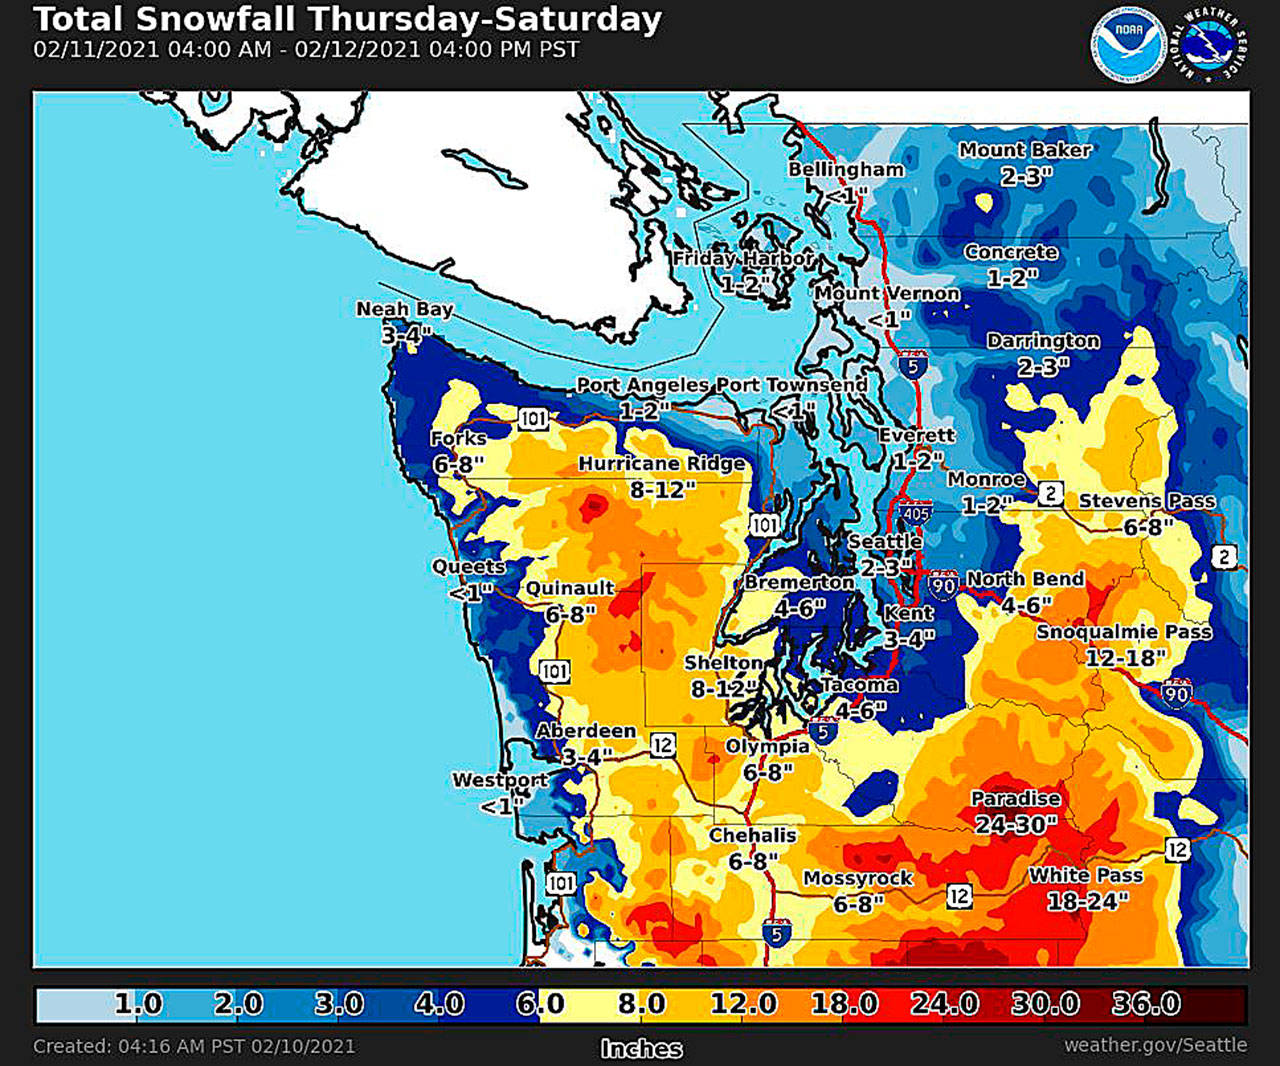 COURTESY NATIONAL WEATHER SERVICE SEATTLE
A Wednesday morning update shows the potential for snowfall Thursday through Saturday.